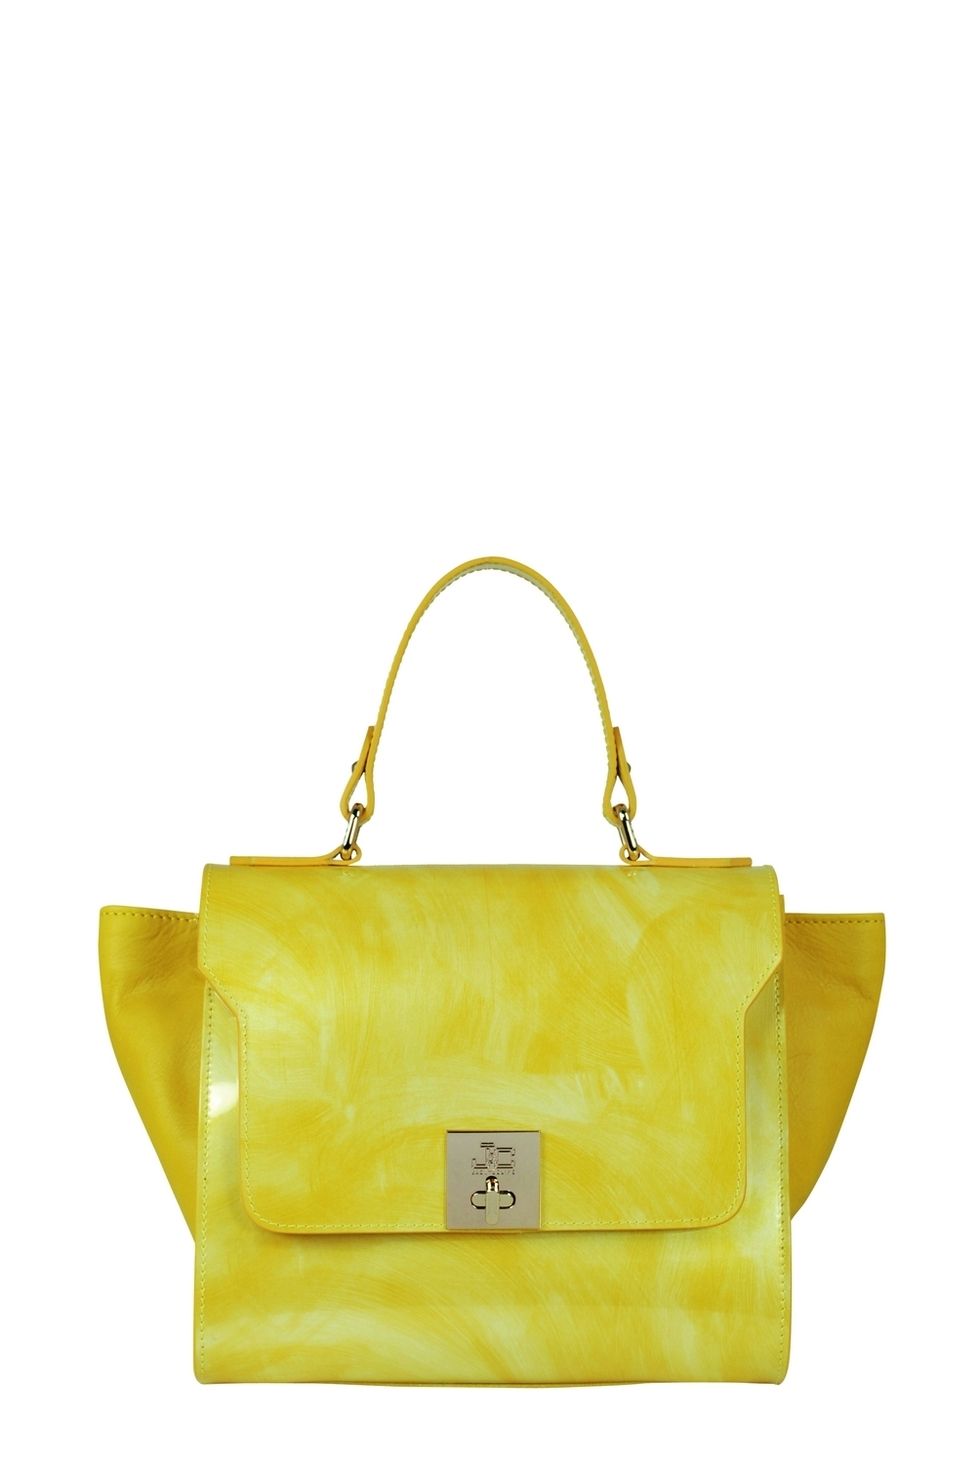 Yellow, Bag, Style, Fashion accessory, Luggage and bags, Shoulder bag, Leather, Handbag, Beige, Material property, 